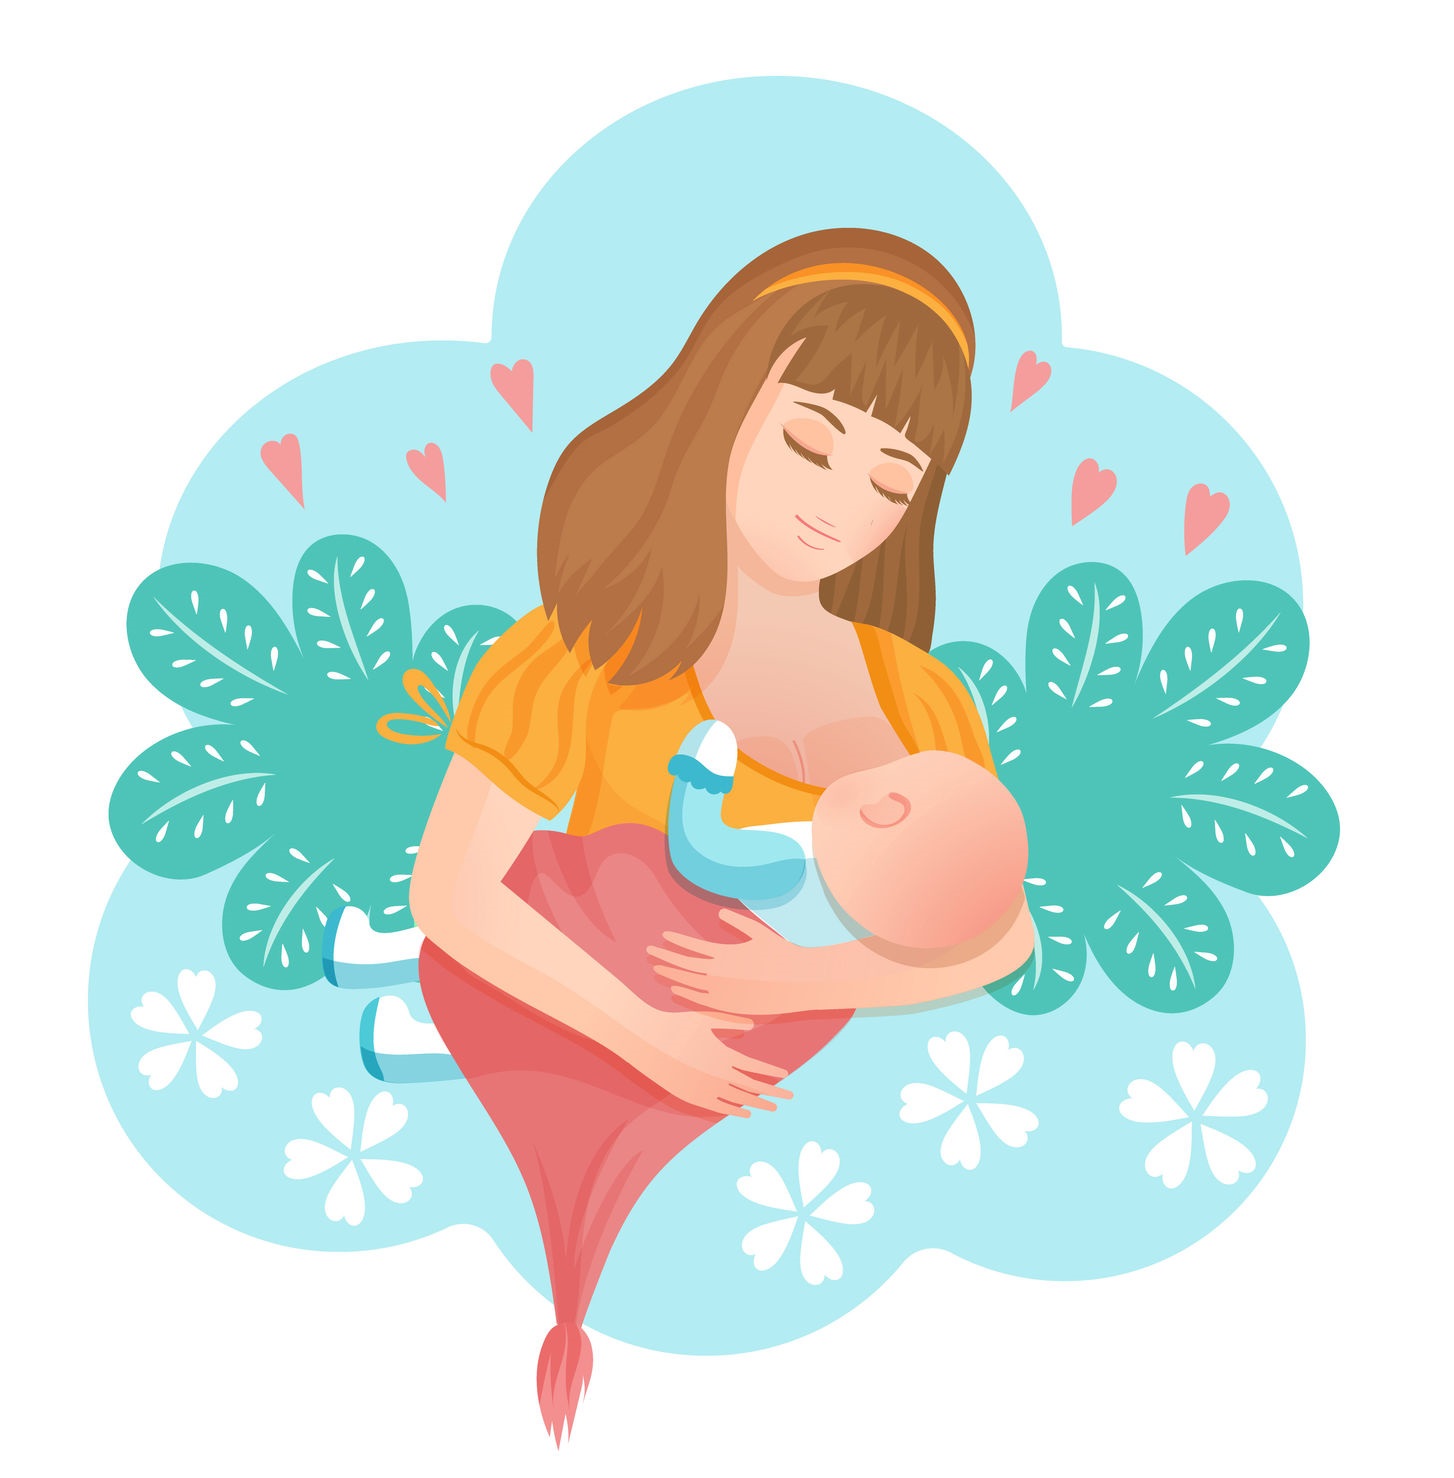 Illustration: a woman dressed in yellow breastfeeding a baby